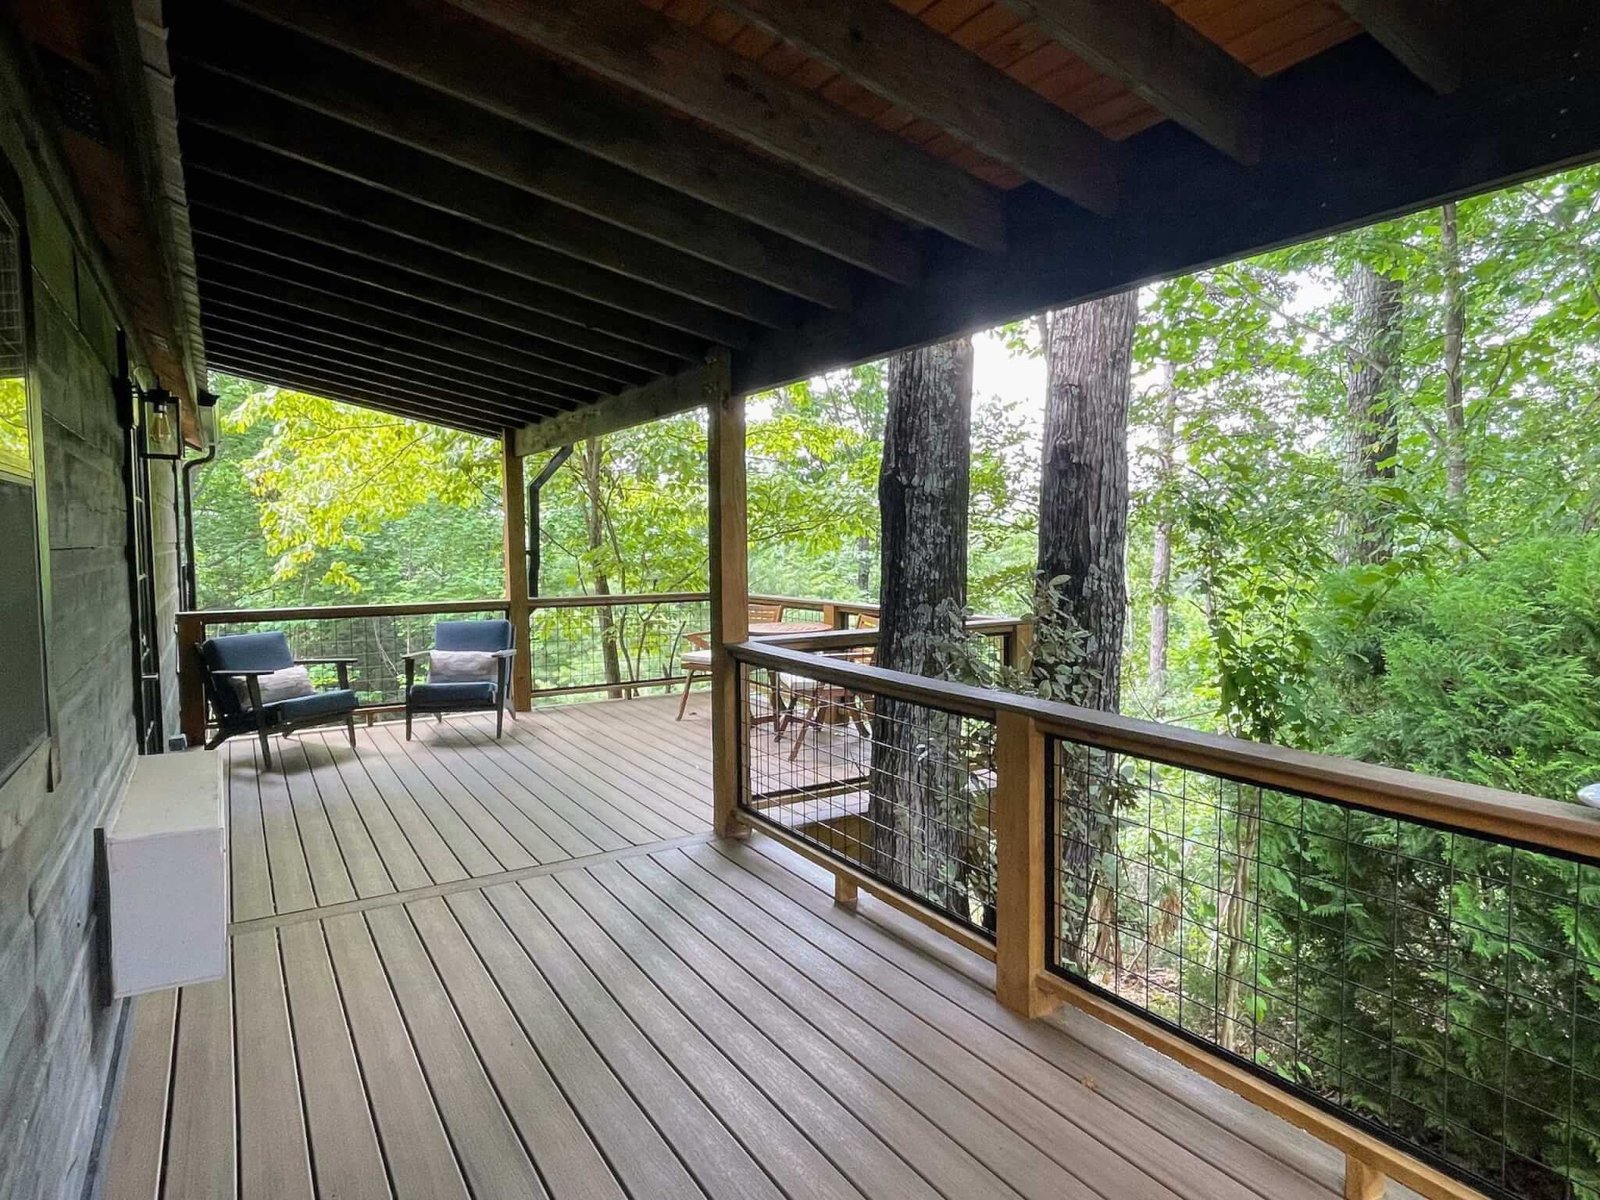 Covered deck surrounded by nature.